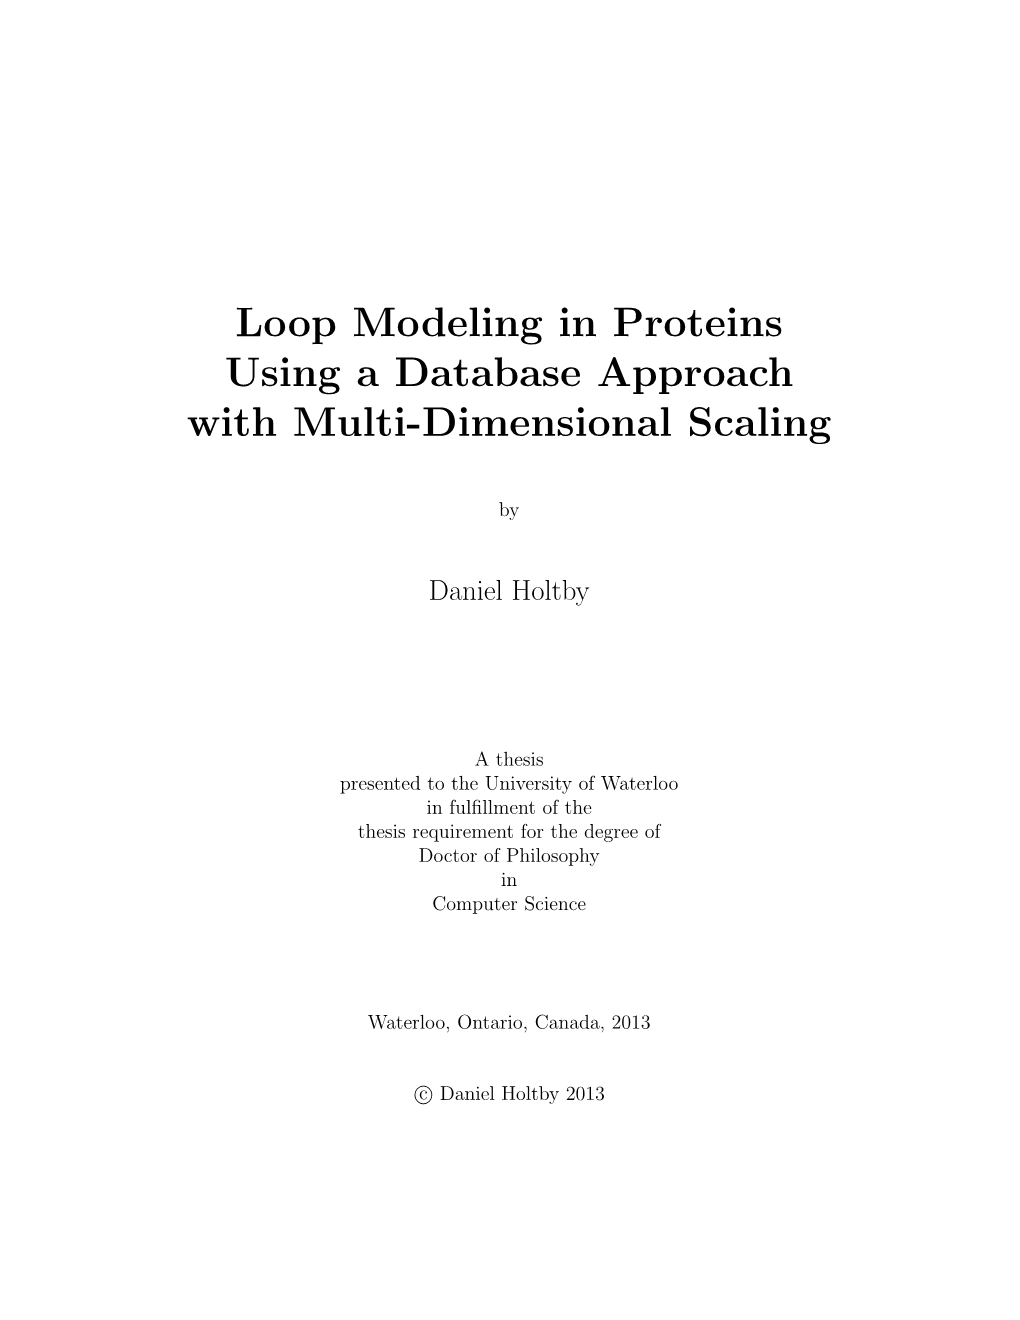 Loop Modeling in Proteins Using a Database Approach with Multi-Dimensional Scaling